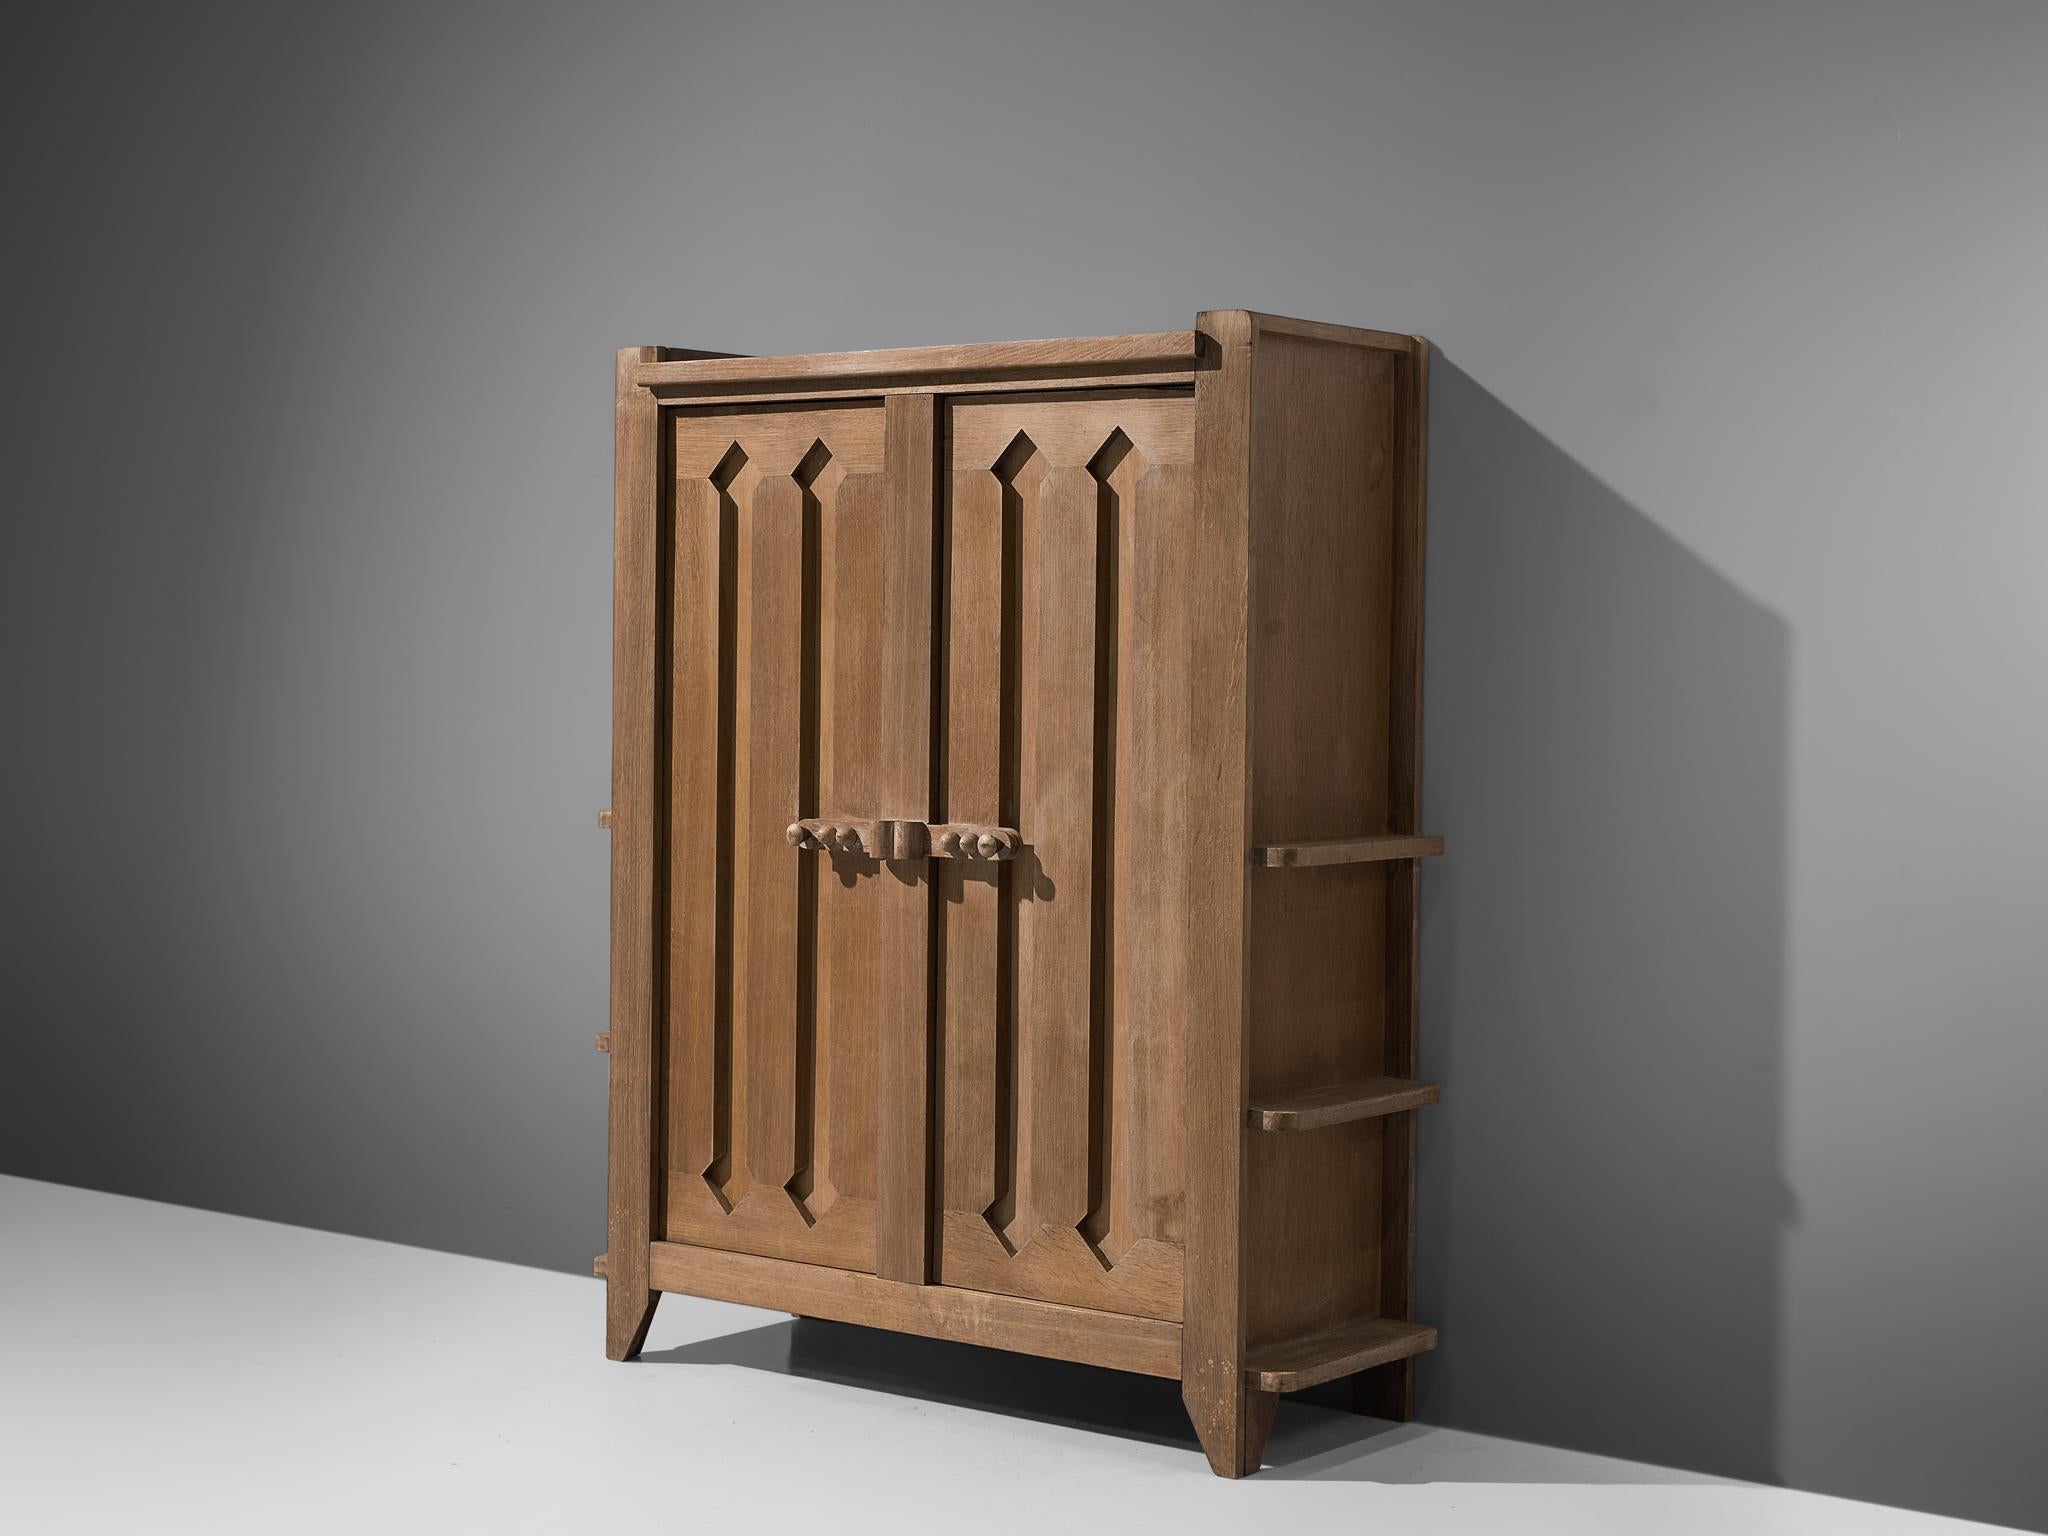 Guillerme et Chambron, armoire, oak, France, 1960s.

This case piece is designed by Guillerme and Chambron and features geometric engravings in the doors that offers plenty of storage. The armoire contains characteristic, sturdy handles of